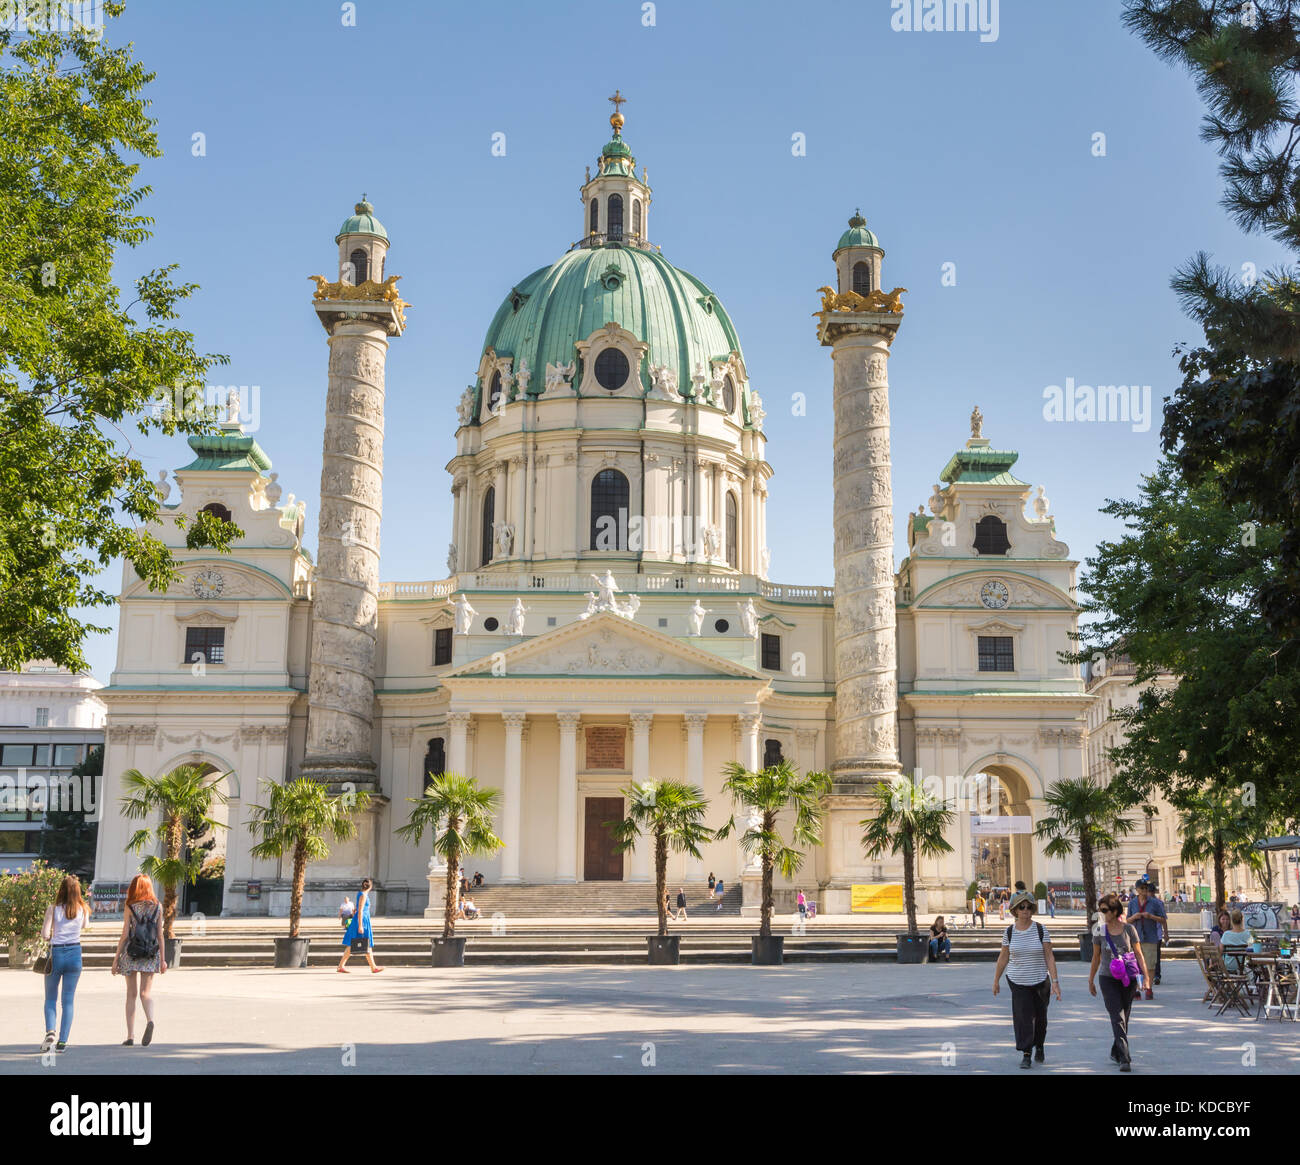 VIENNA, AUSTRIA - AUGUST 29: Tourists at the Baroque Karlskirche in Vienna, Austria on August 29, 2017. The church is considered the most outstanding  Stock Photo